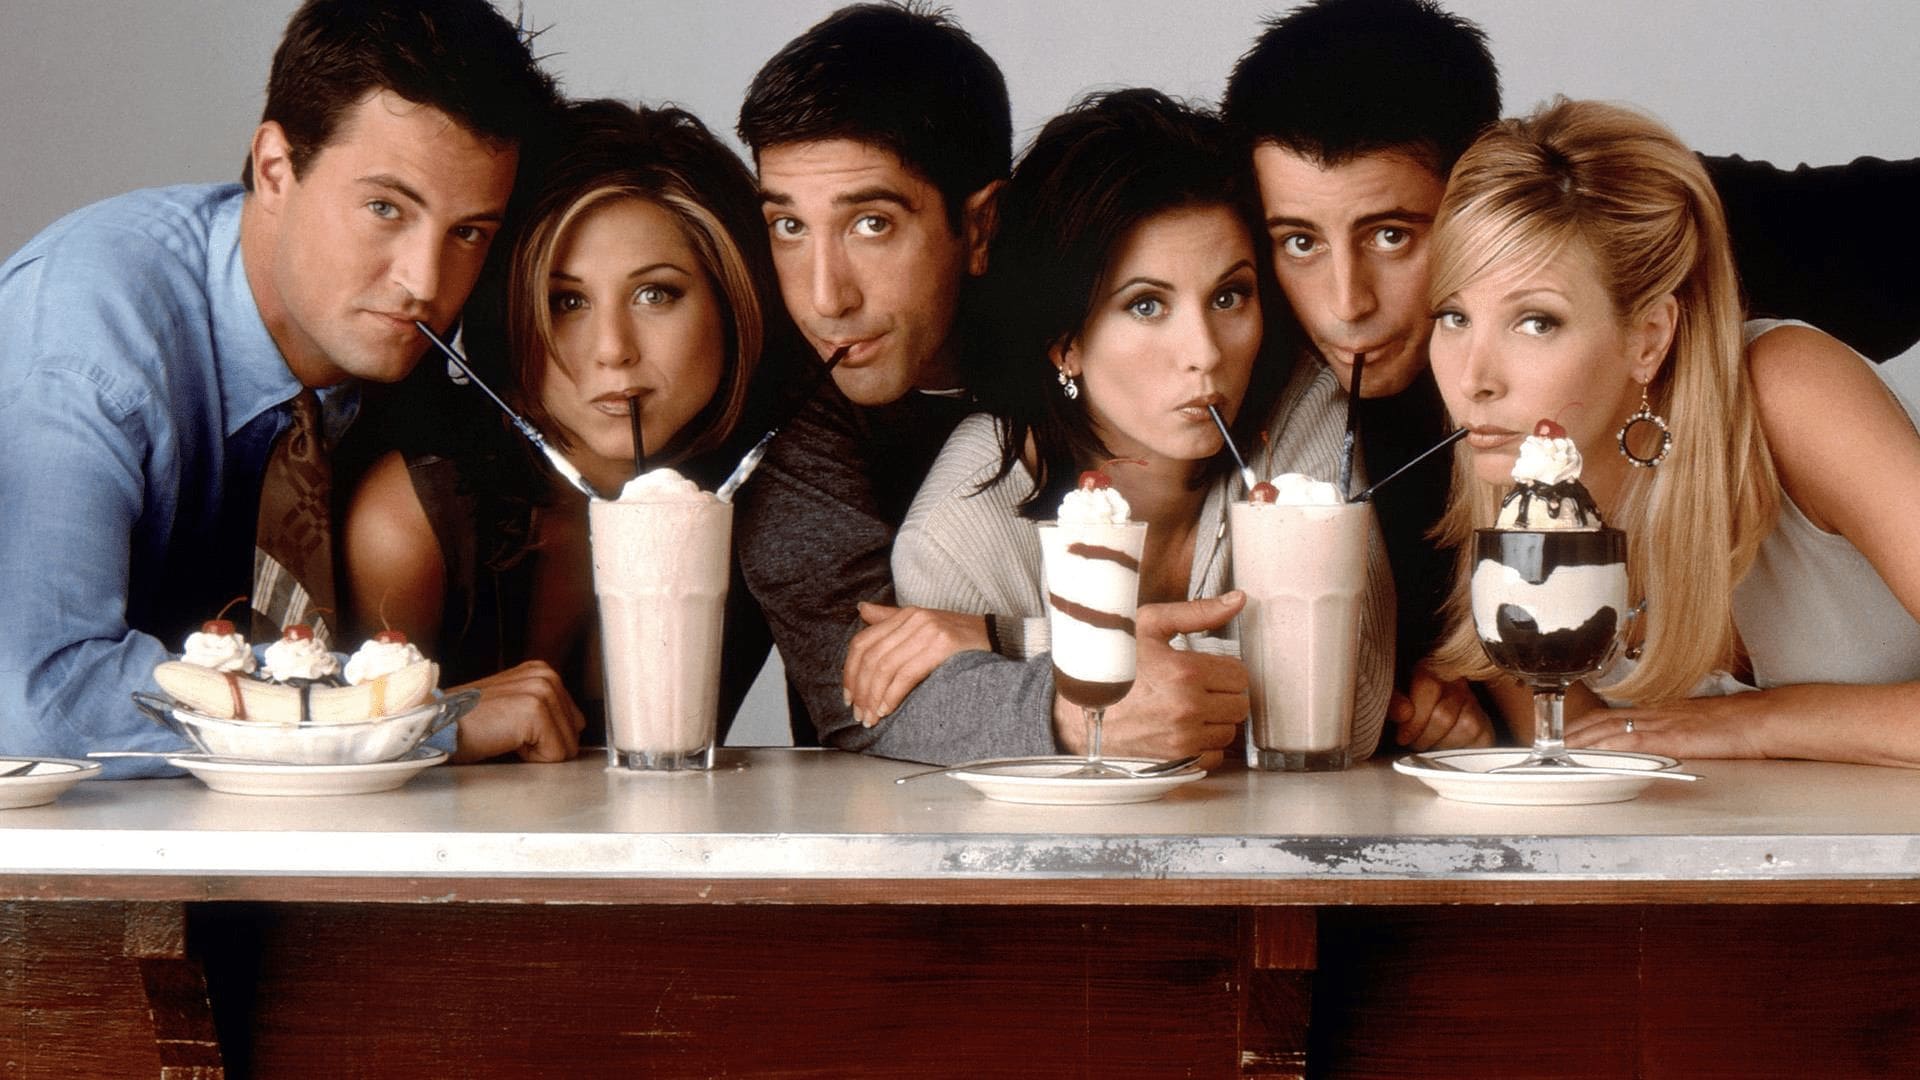 The 10 Best Sitcoms Ever Made, Ranked by Popularity